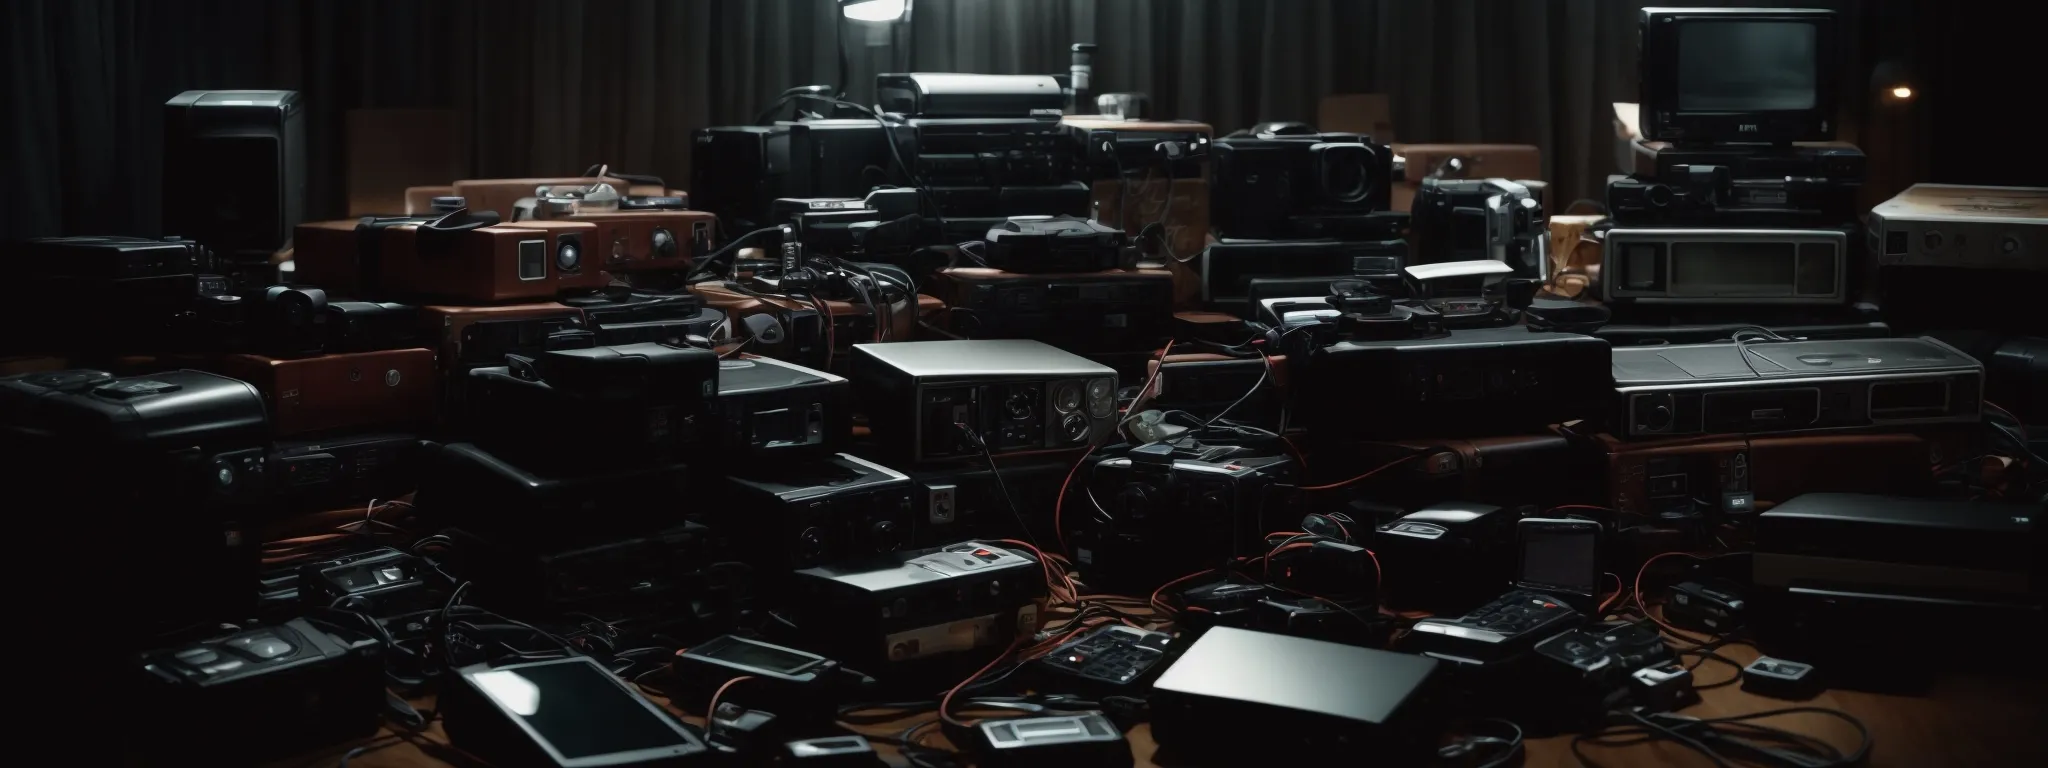 a pile of various electronic devices in a dimly lit room, suggesting secretive technology.